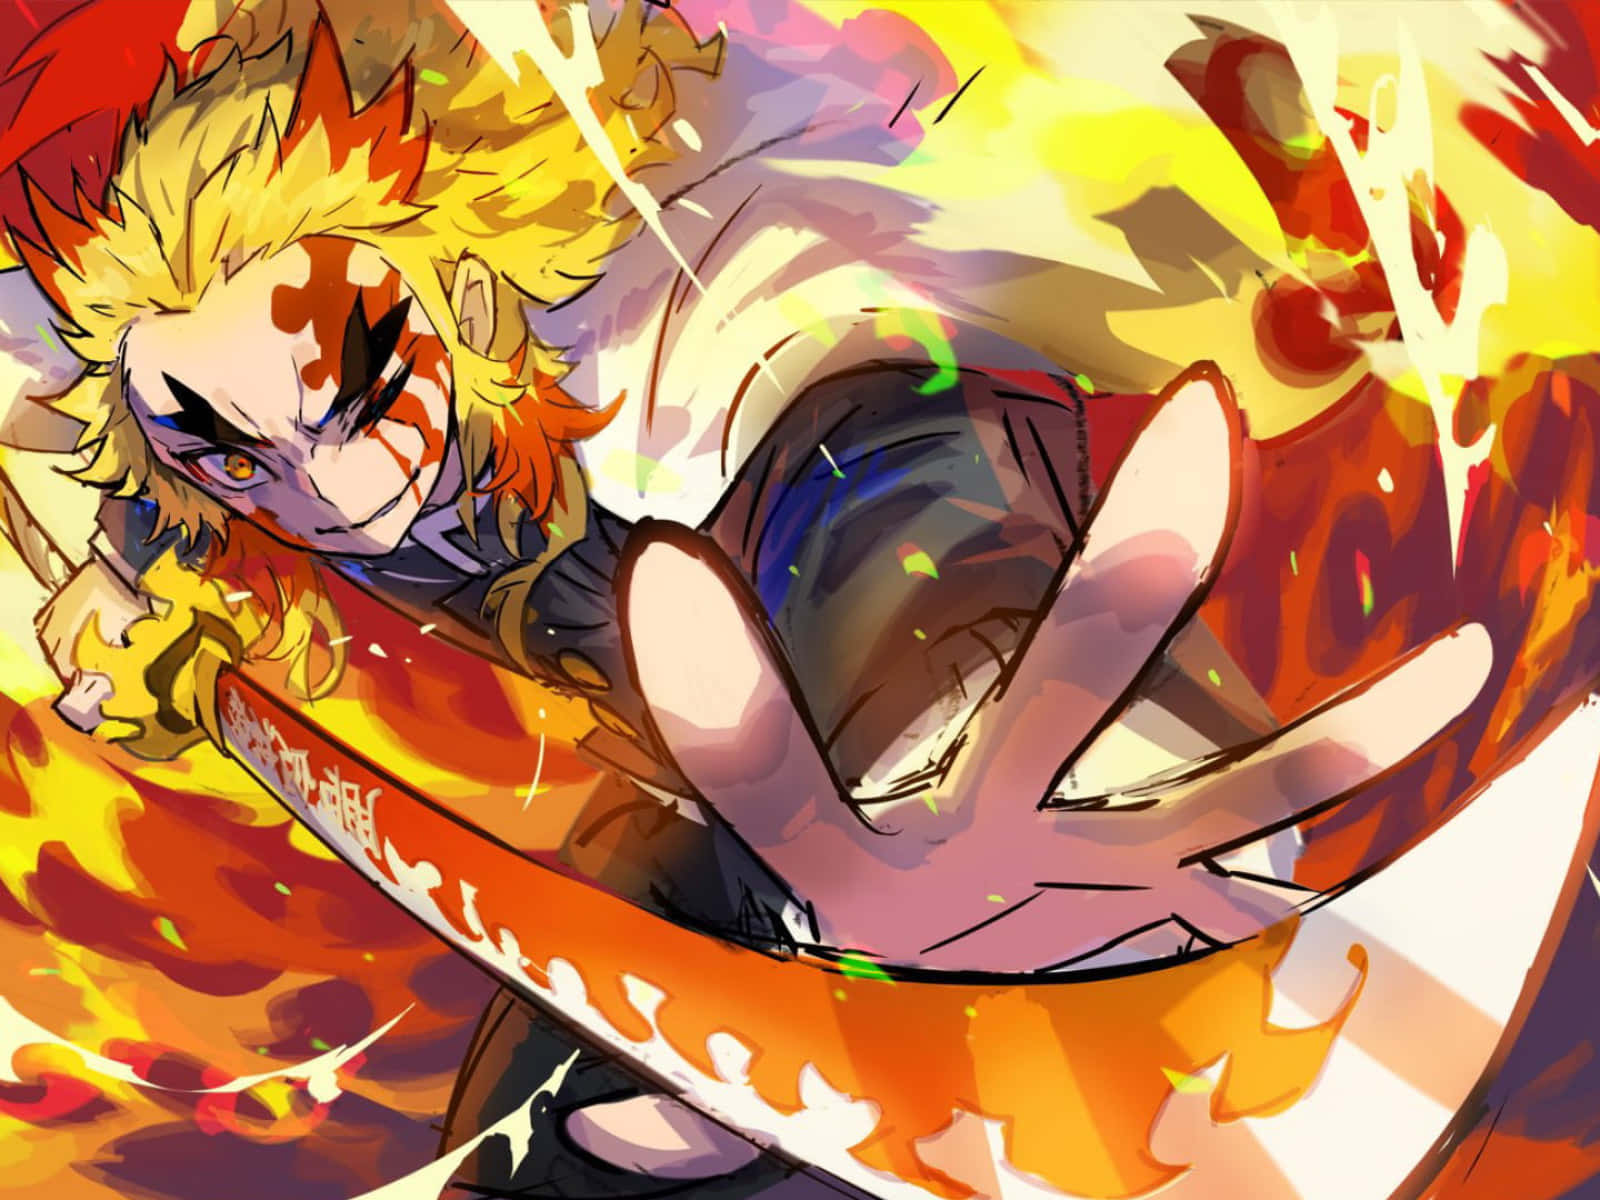 Rengoku Aesthetic Wallpaper - A Battle Stance Brimming with Flames and Passion Wallpaper